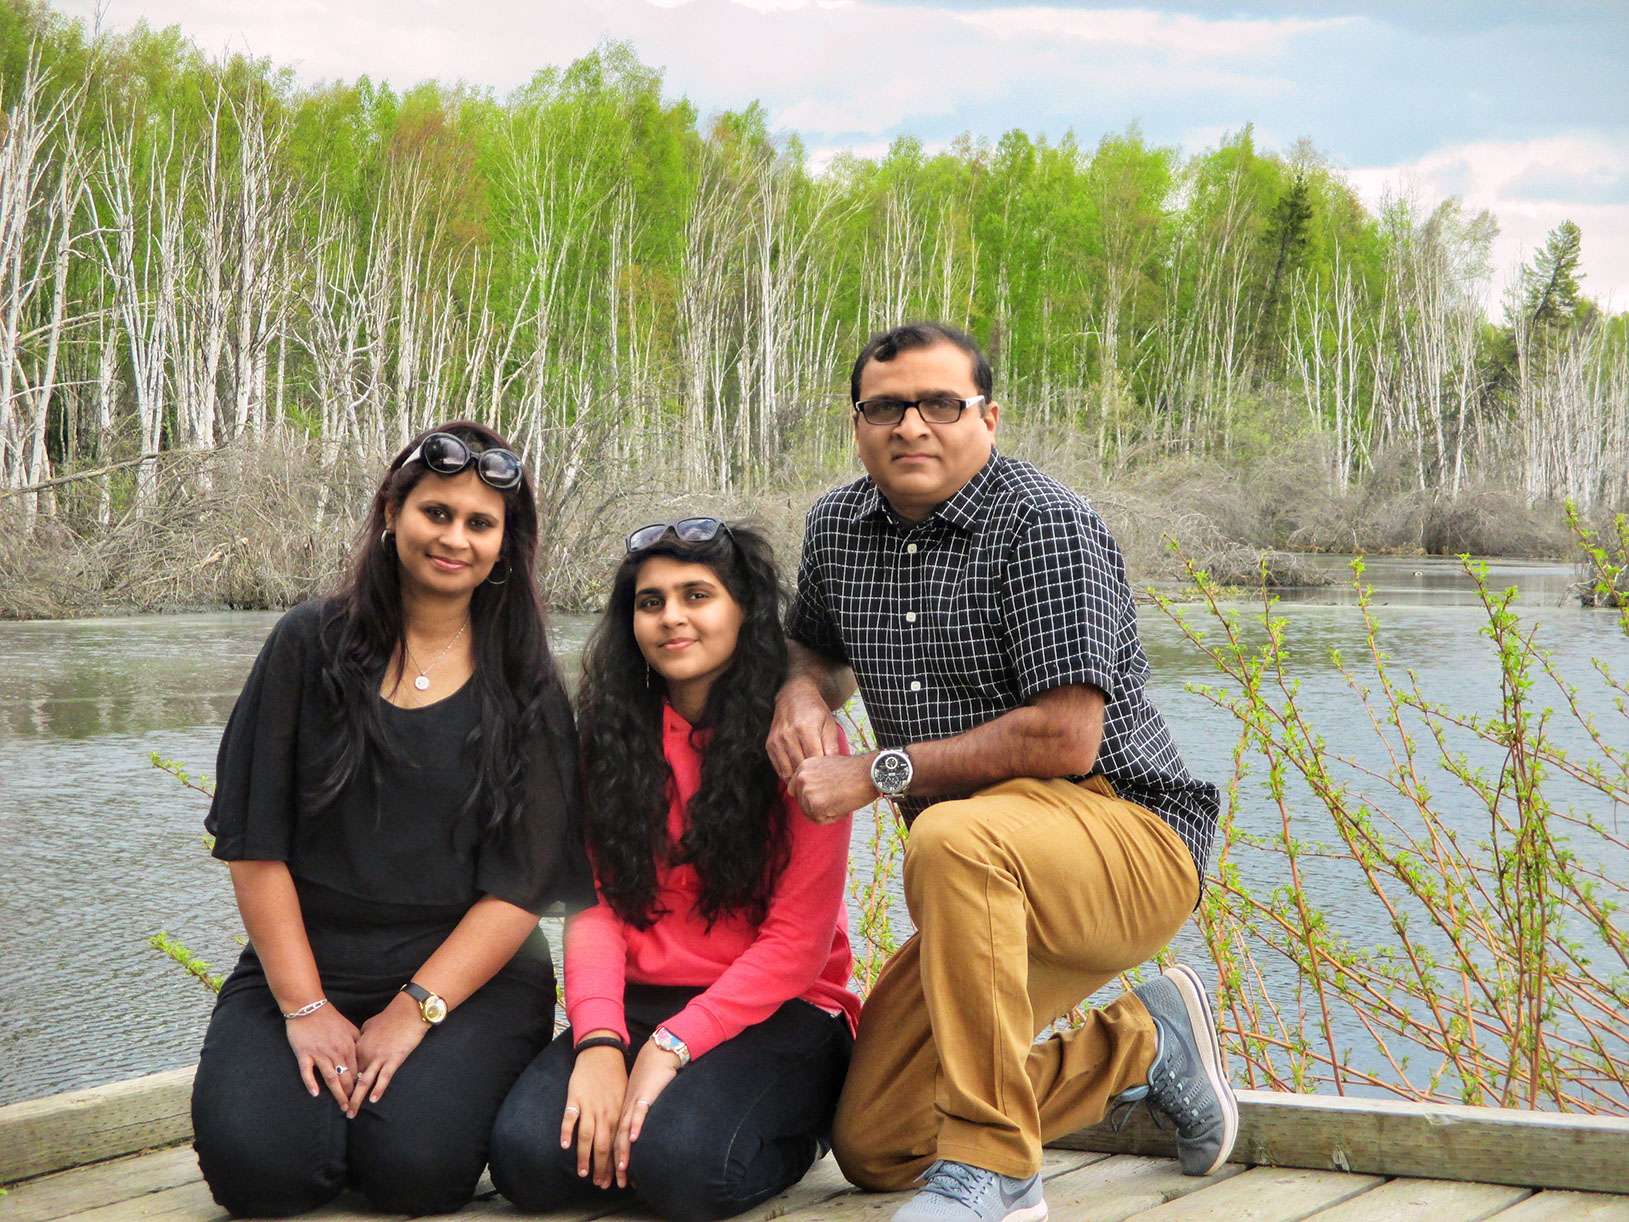 Family picture against the beautiful landscape of Fairbanks Alaska